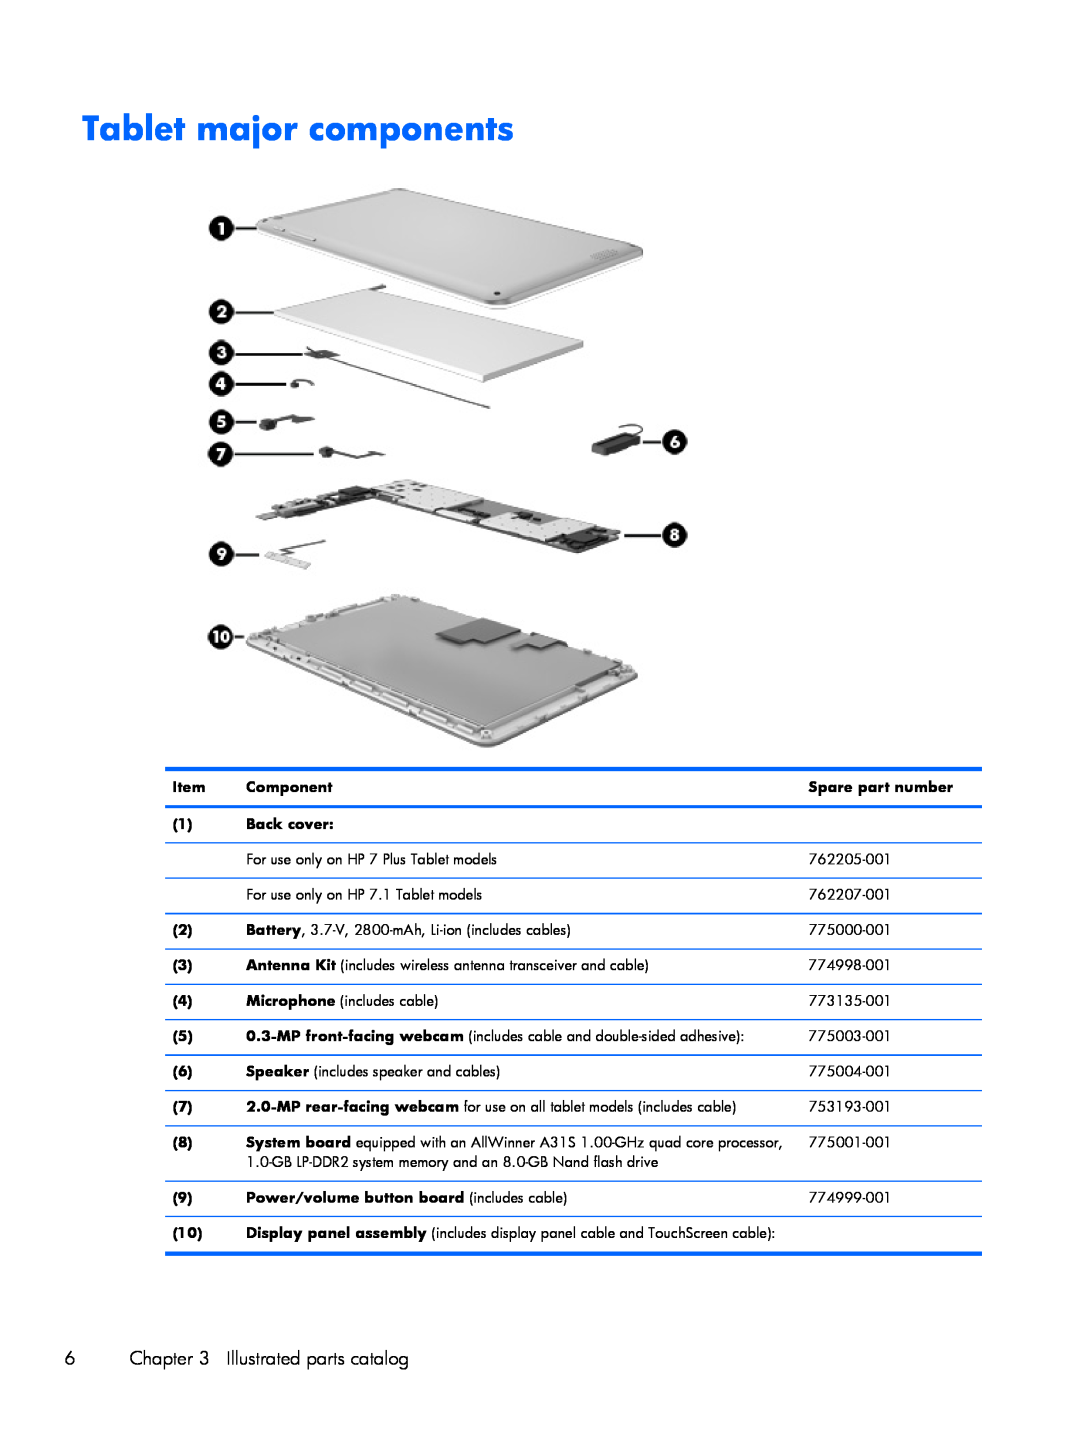 HP 7 Plus 1302us, 7 Plus 1301 manual Tablet major components, Illustrated parts catalog 